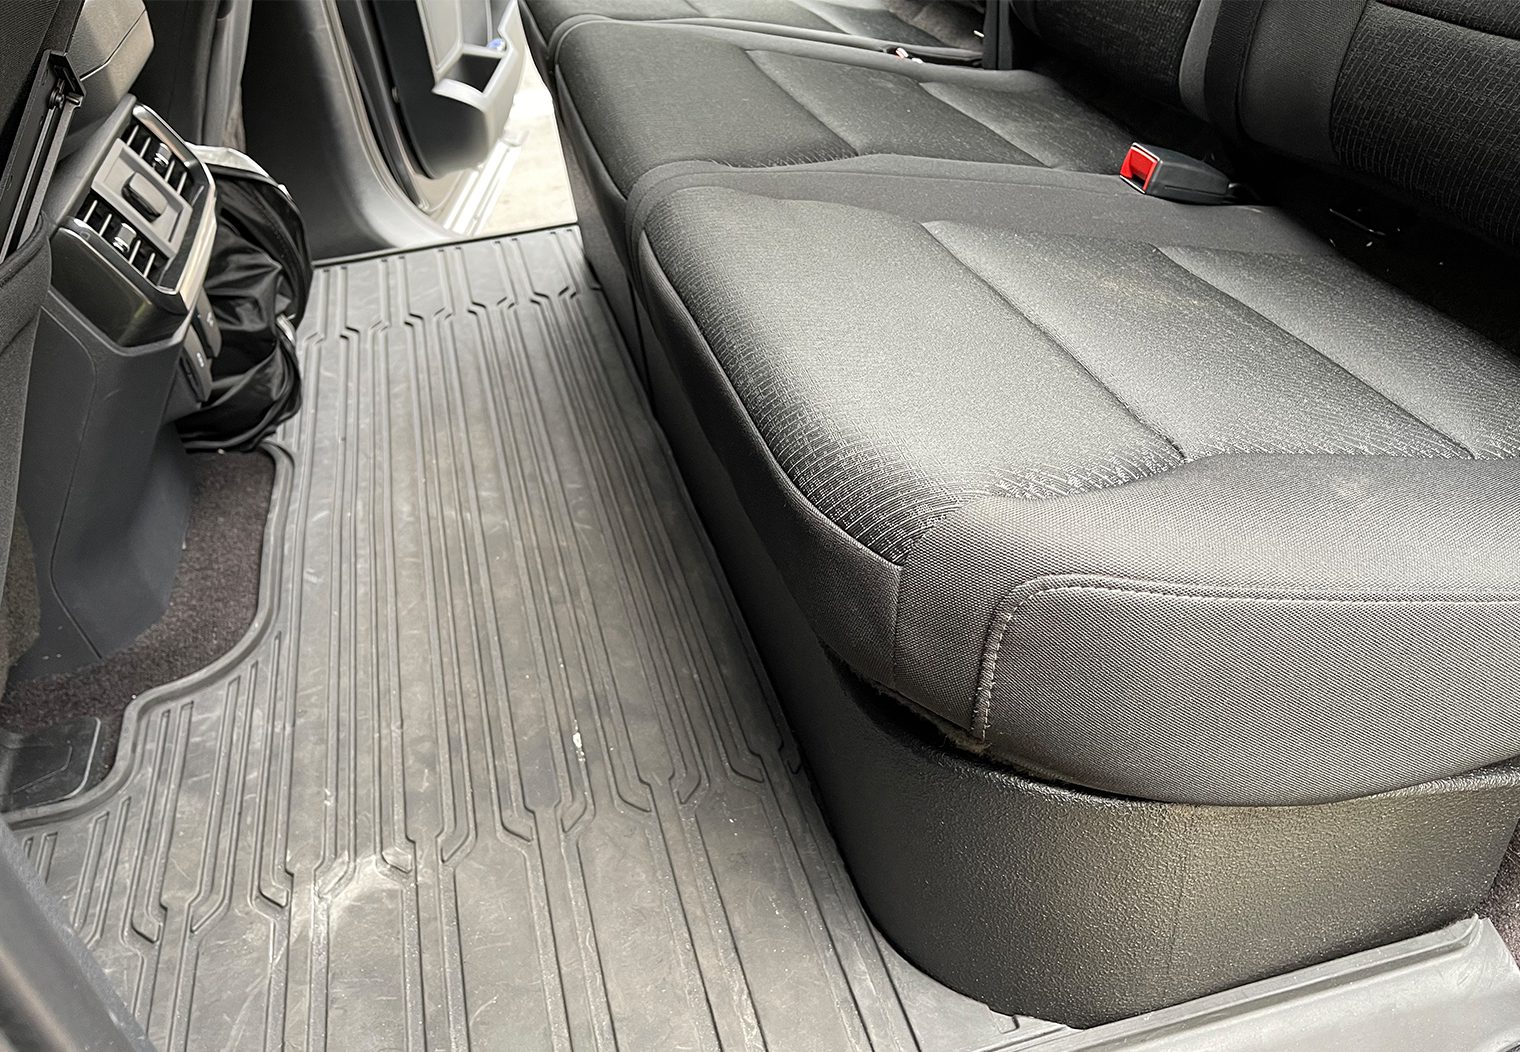 Rounded corner fitment on the driver side of the rear seats